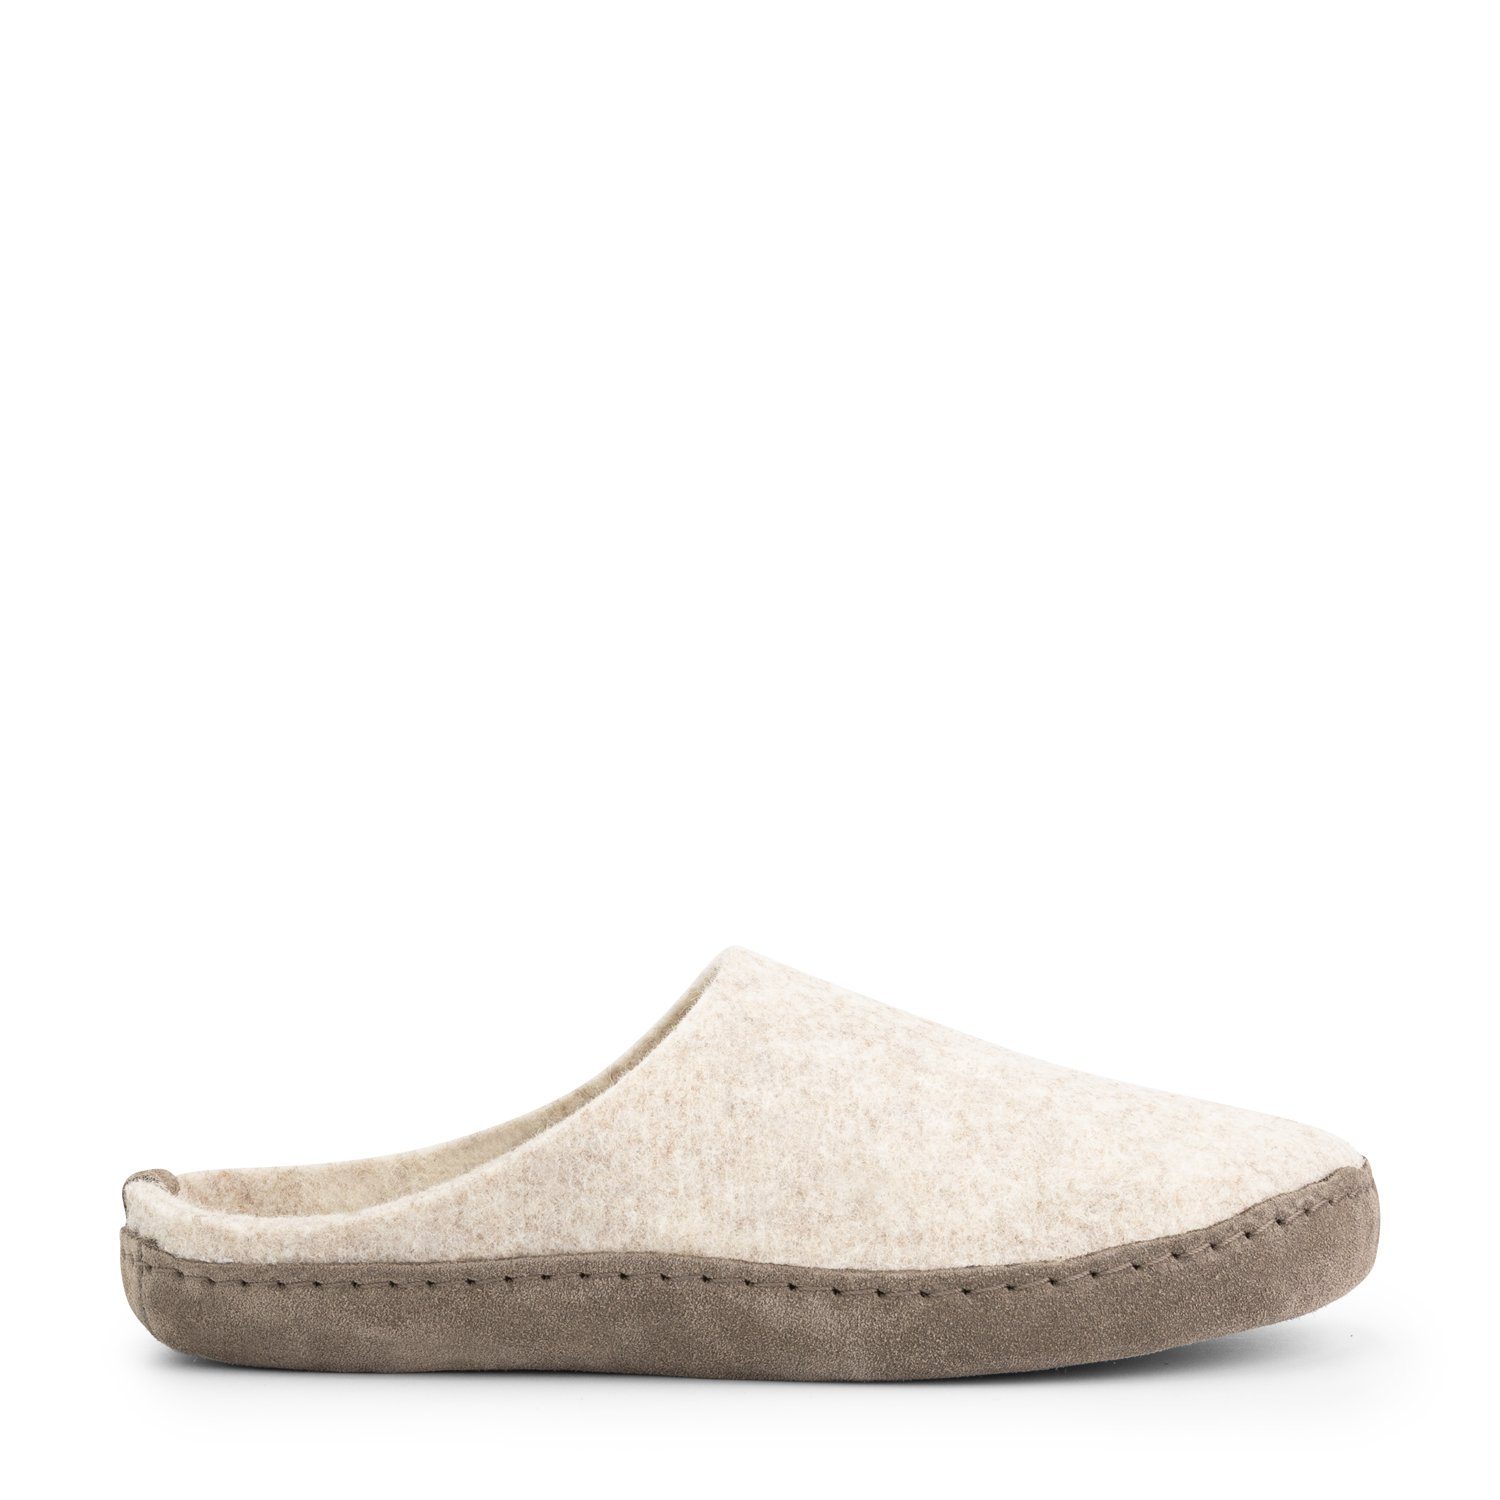 Travelin' Get-Home Lady Hausschuh (Pull-on) mit wolle Sand